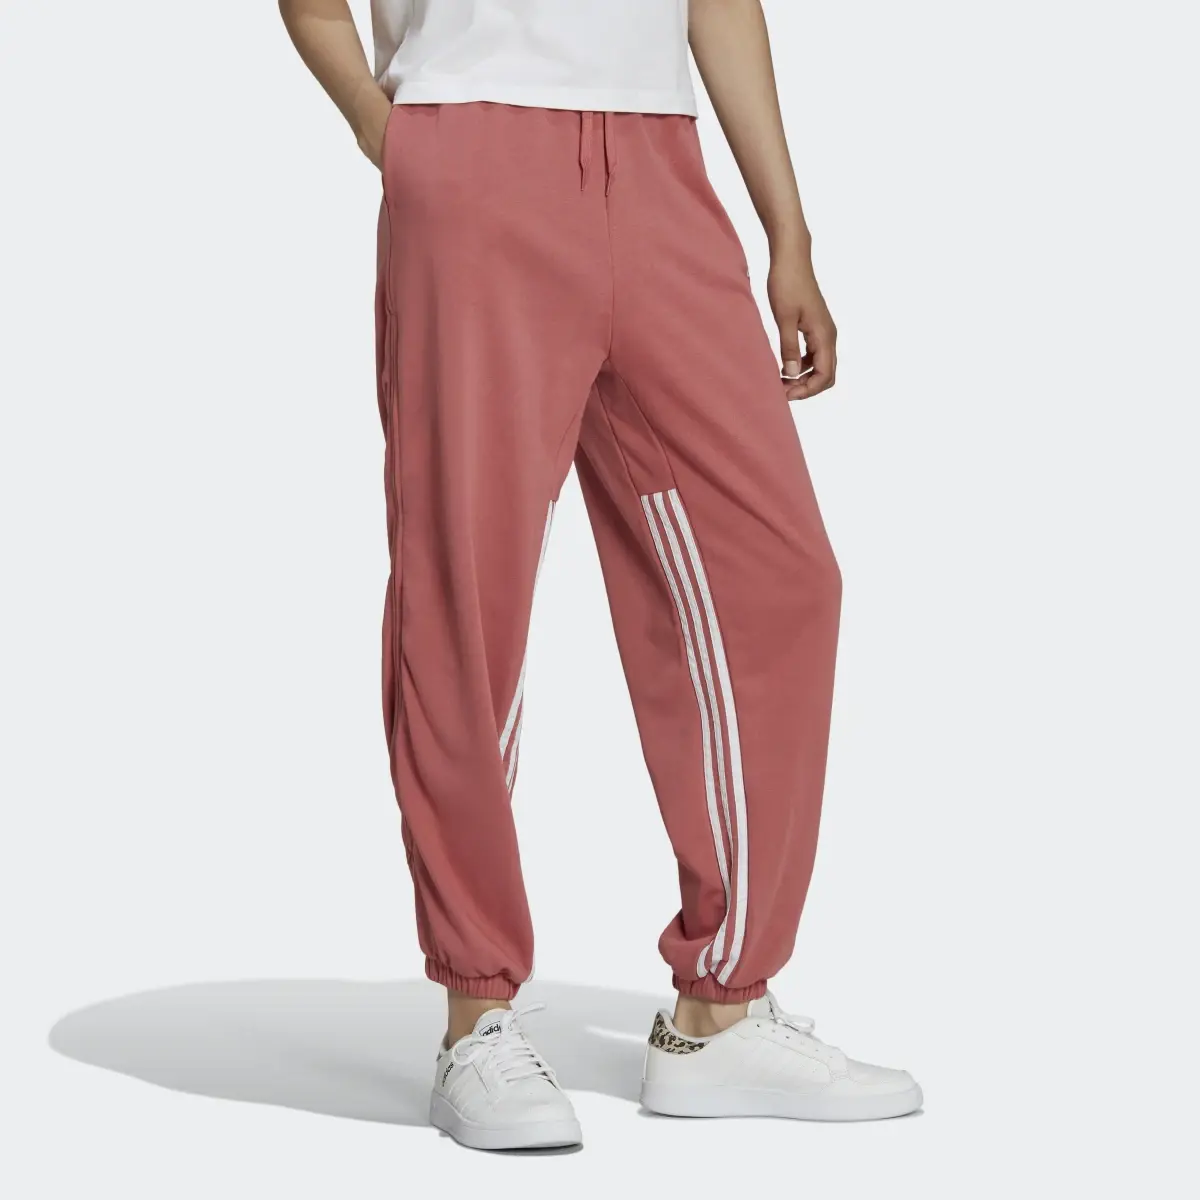 Adidas Hyperglam 3-Stripes Oversized Cuffed Joggers with Side Zippers. 3